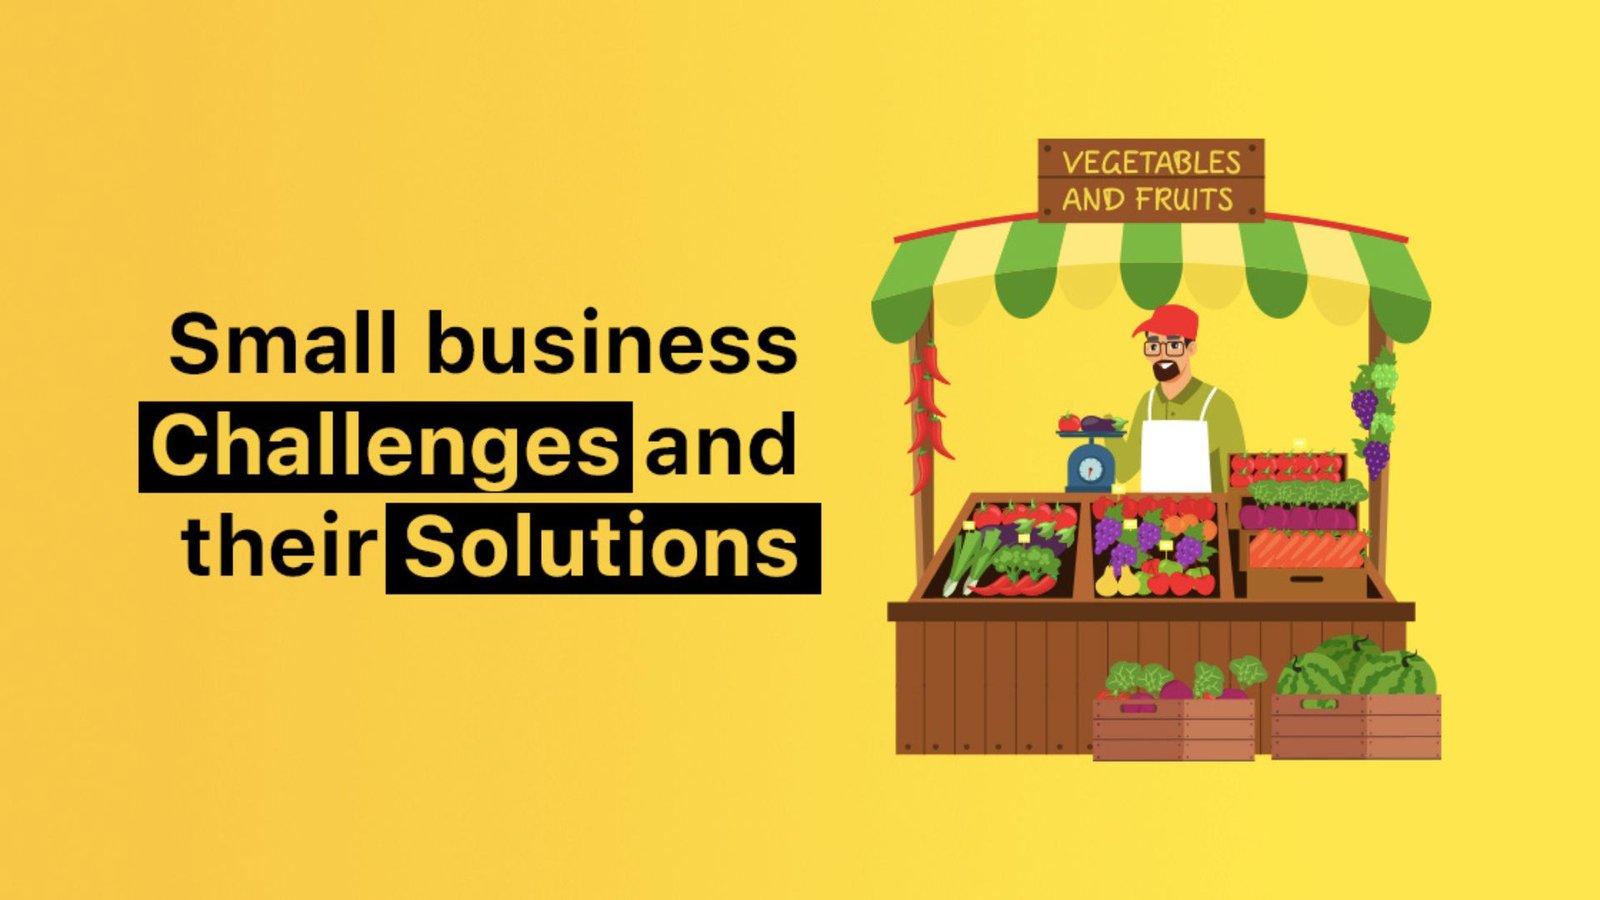 Challenges and Solutions for Small Businesses in Fonni